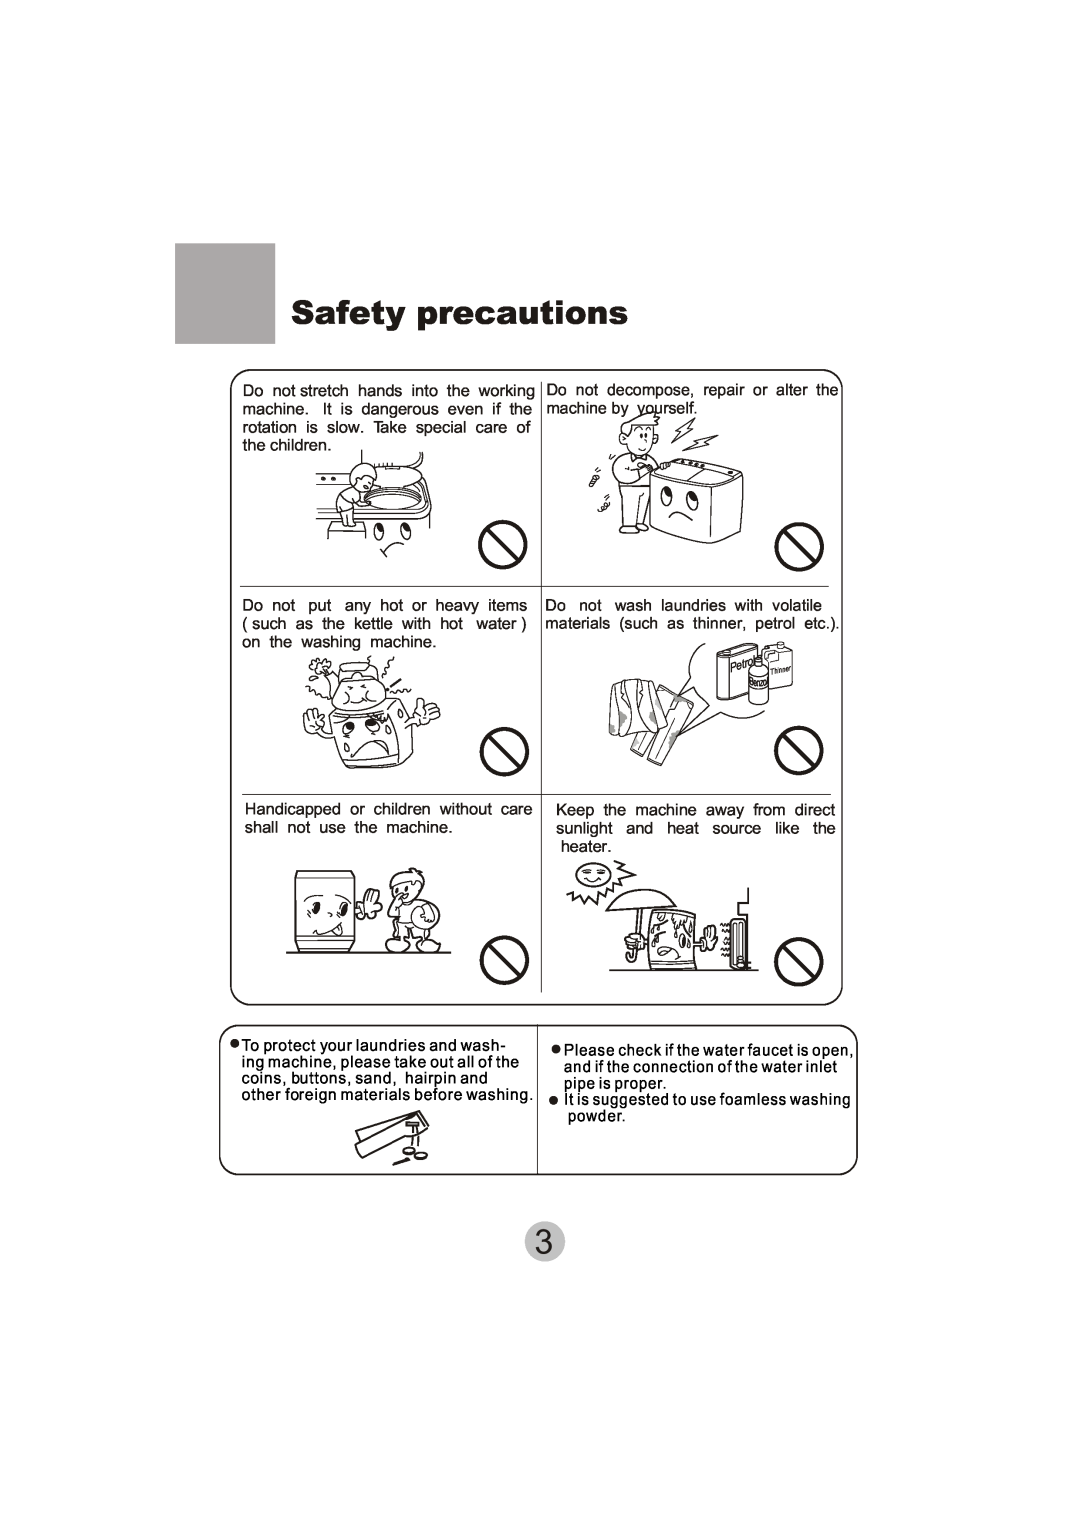 Haier XPB135-LA user manual Safety precautions, Do not decompose, repair or alter the machine by yourself 